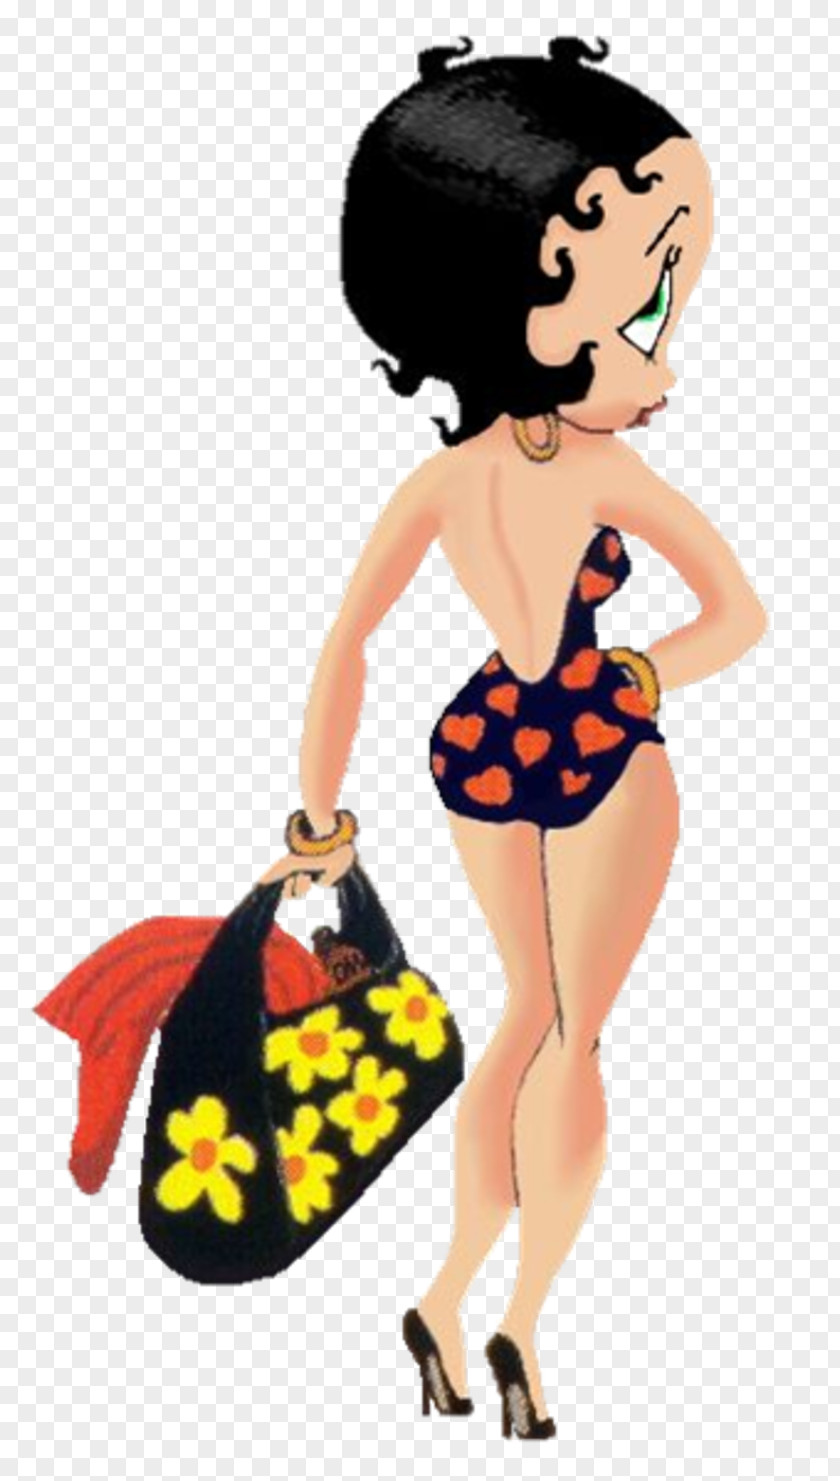 Betty Boop Animated Film Cartoon Drawing PNG